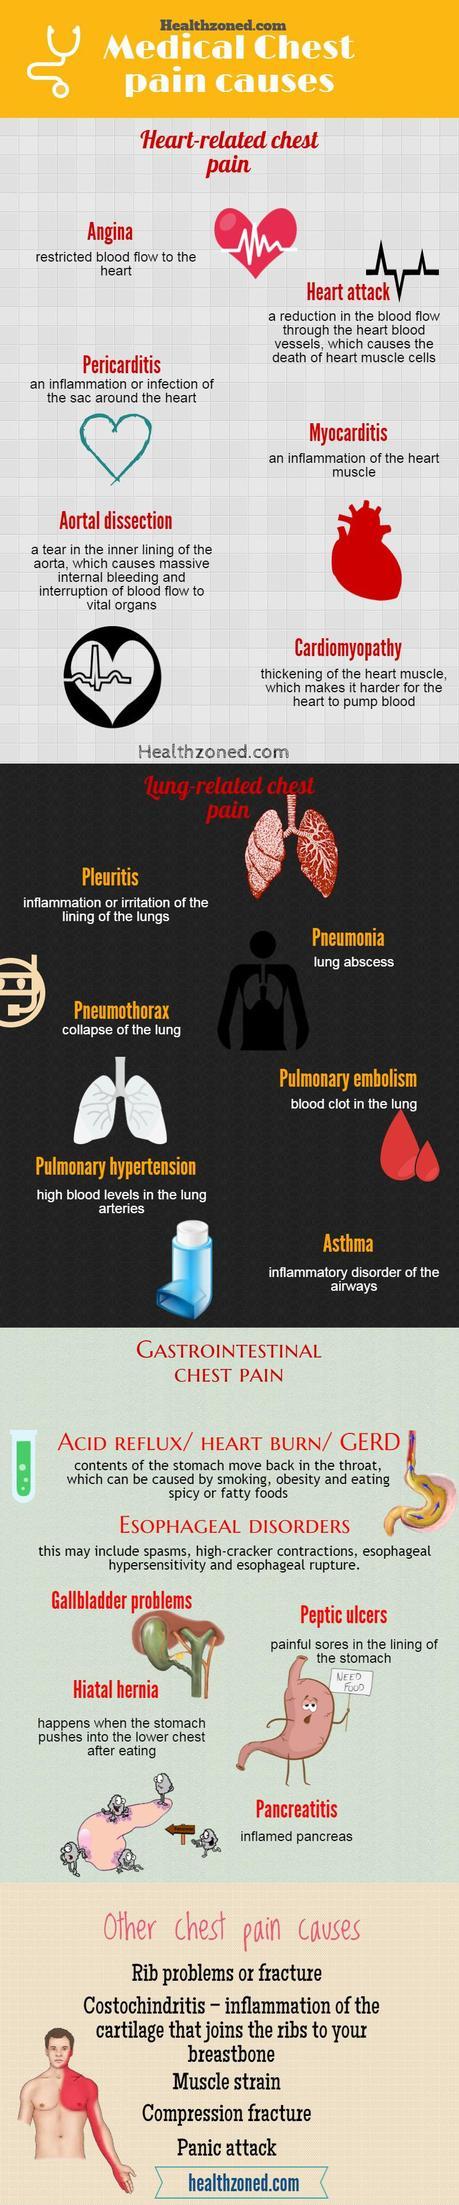 Causes of Chest Pains Infograpic